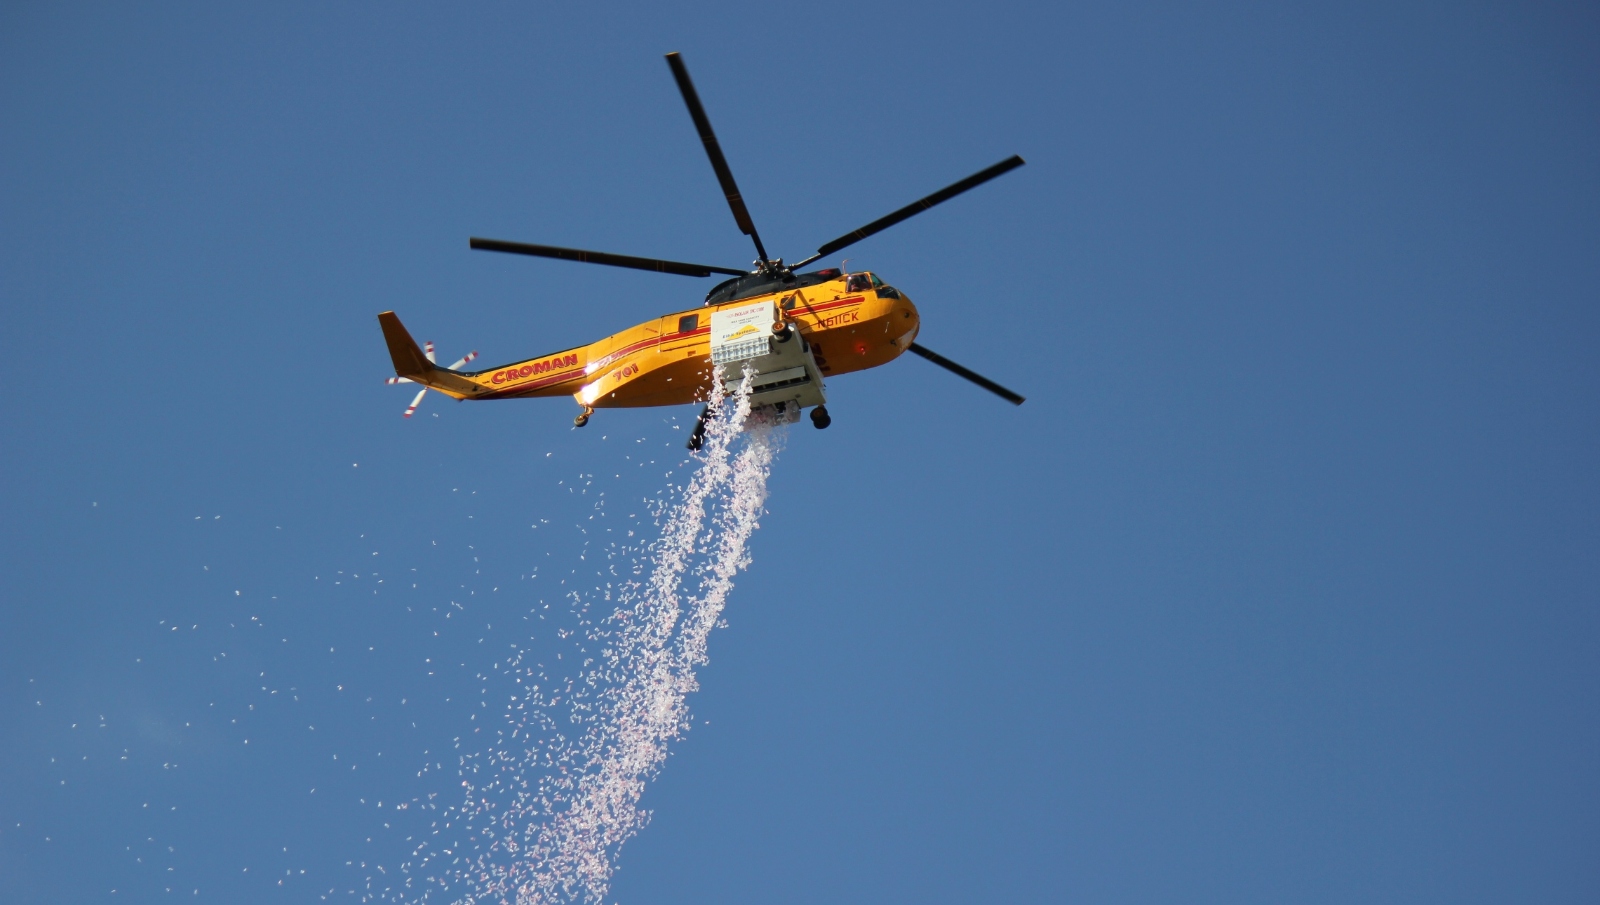 A helicopter releases HyDrop solution’s liquid pellets to extinguish fires. Photo courtesy of Elbit Systems